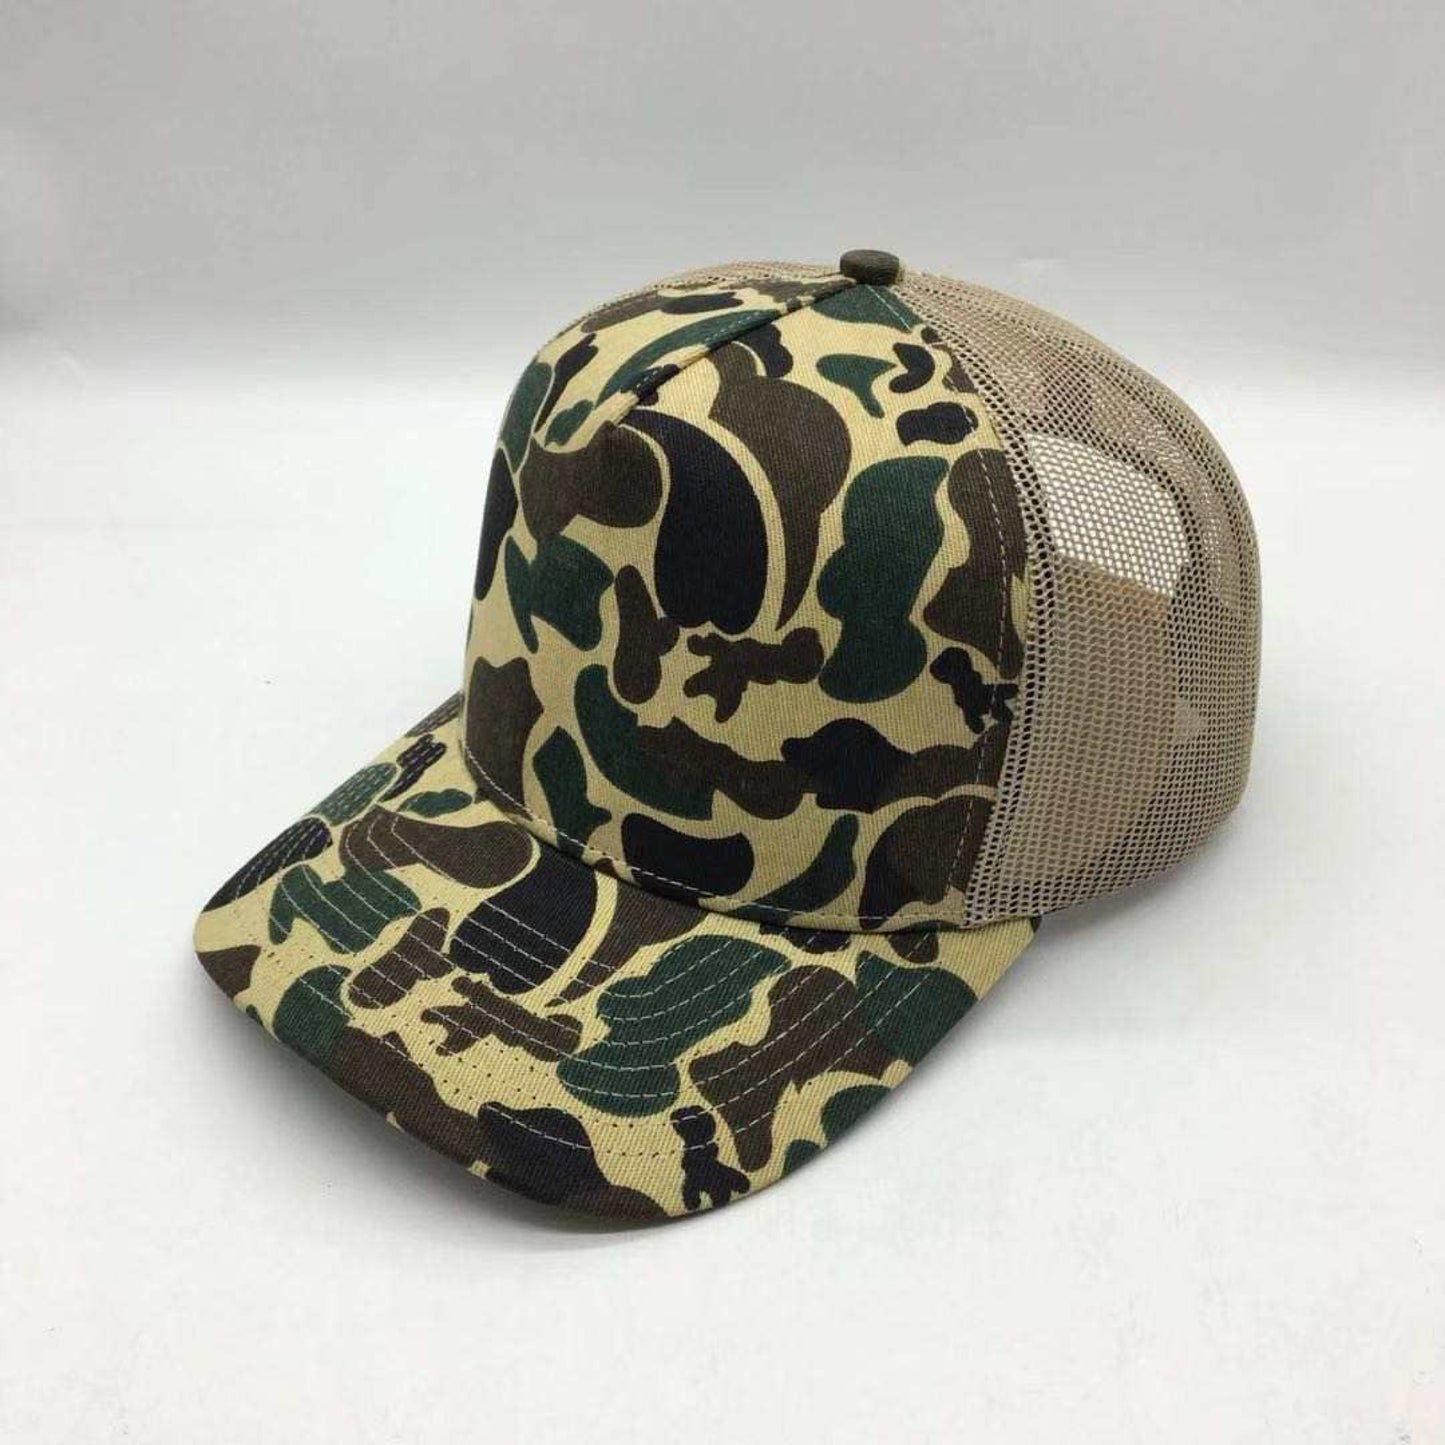 custom leather patch hat, leather patch hats, custom camo hats, custom work hats, custom leather patch hats